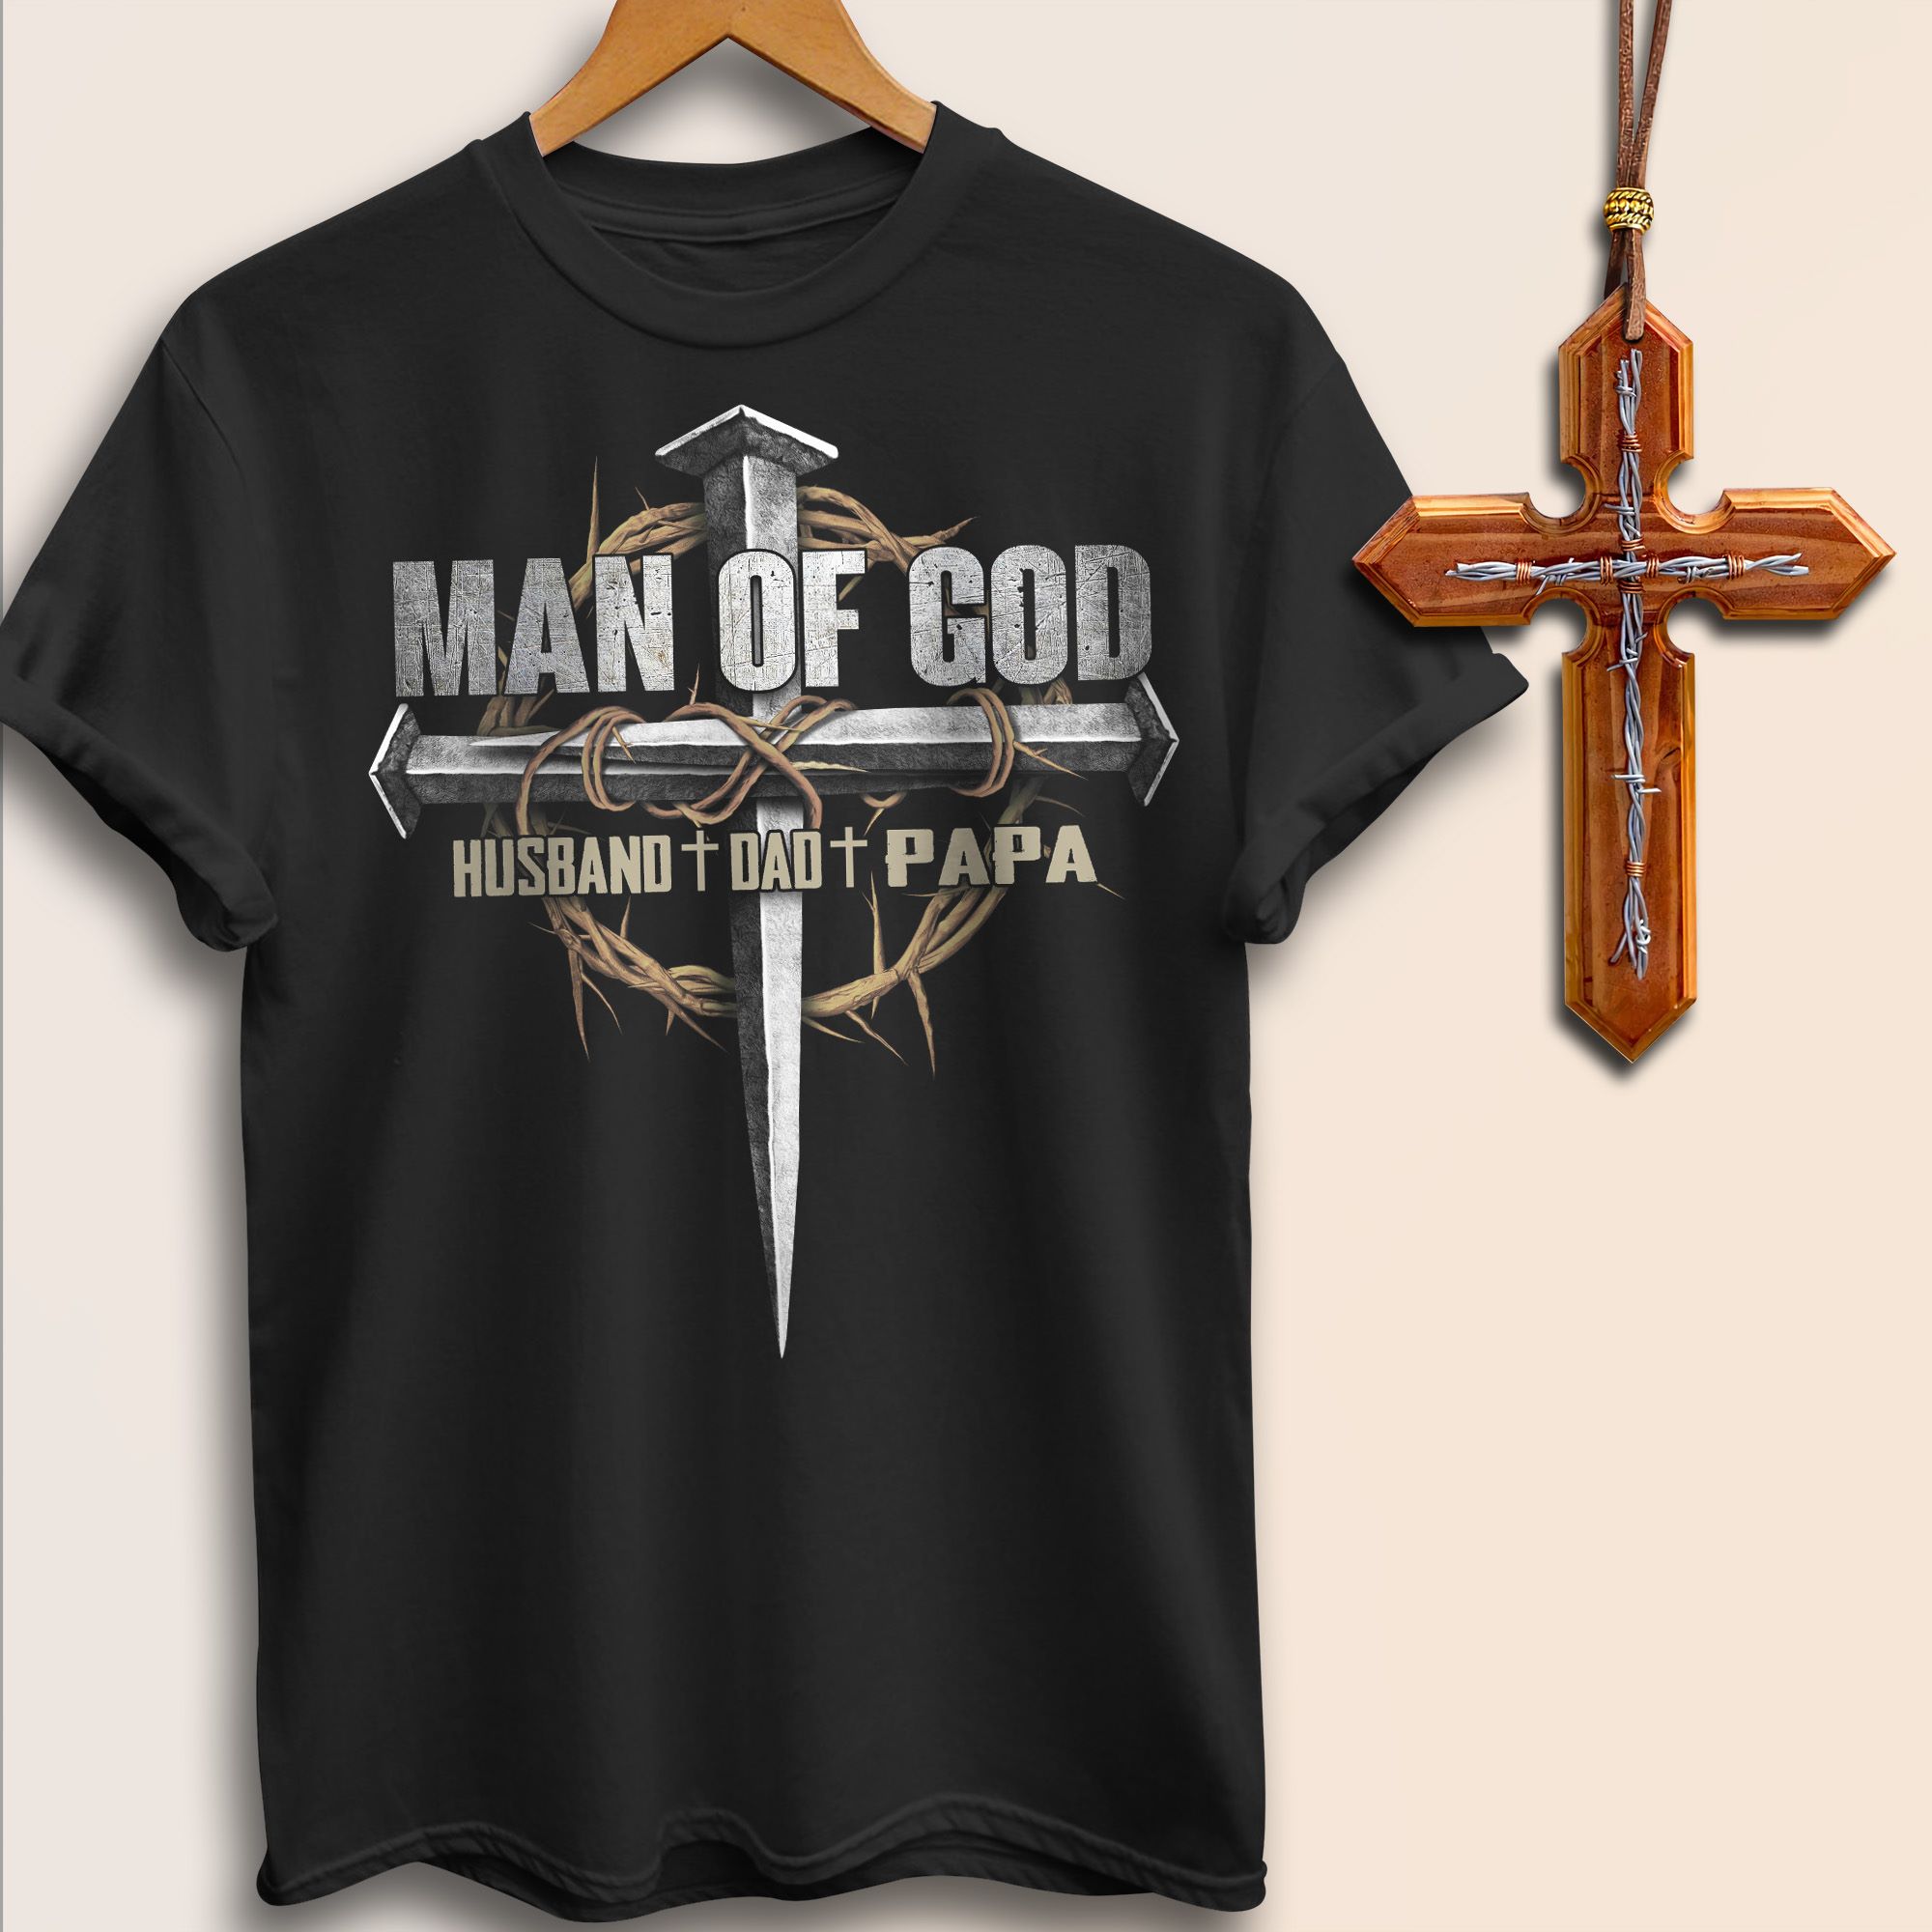 Man of god husband dad papa - Father's day gift